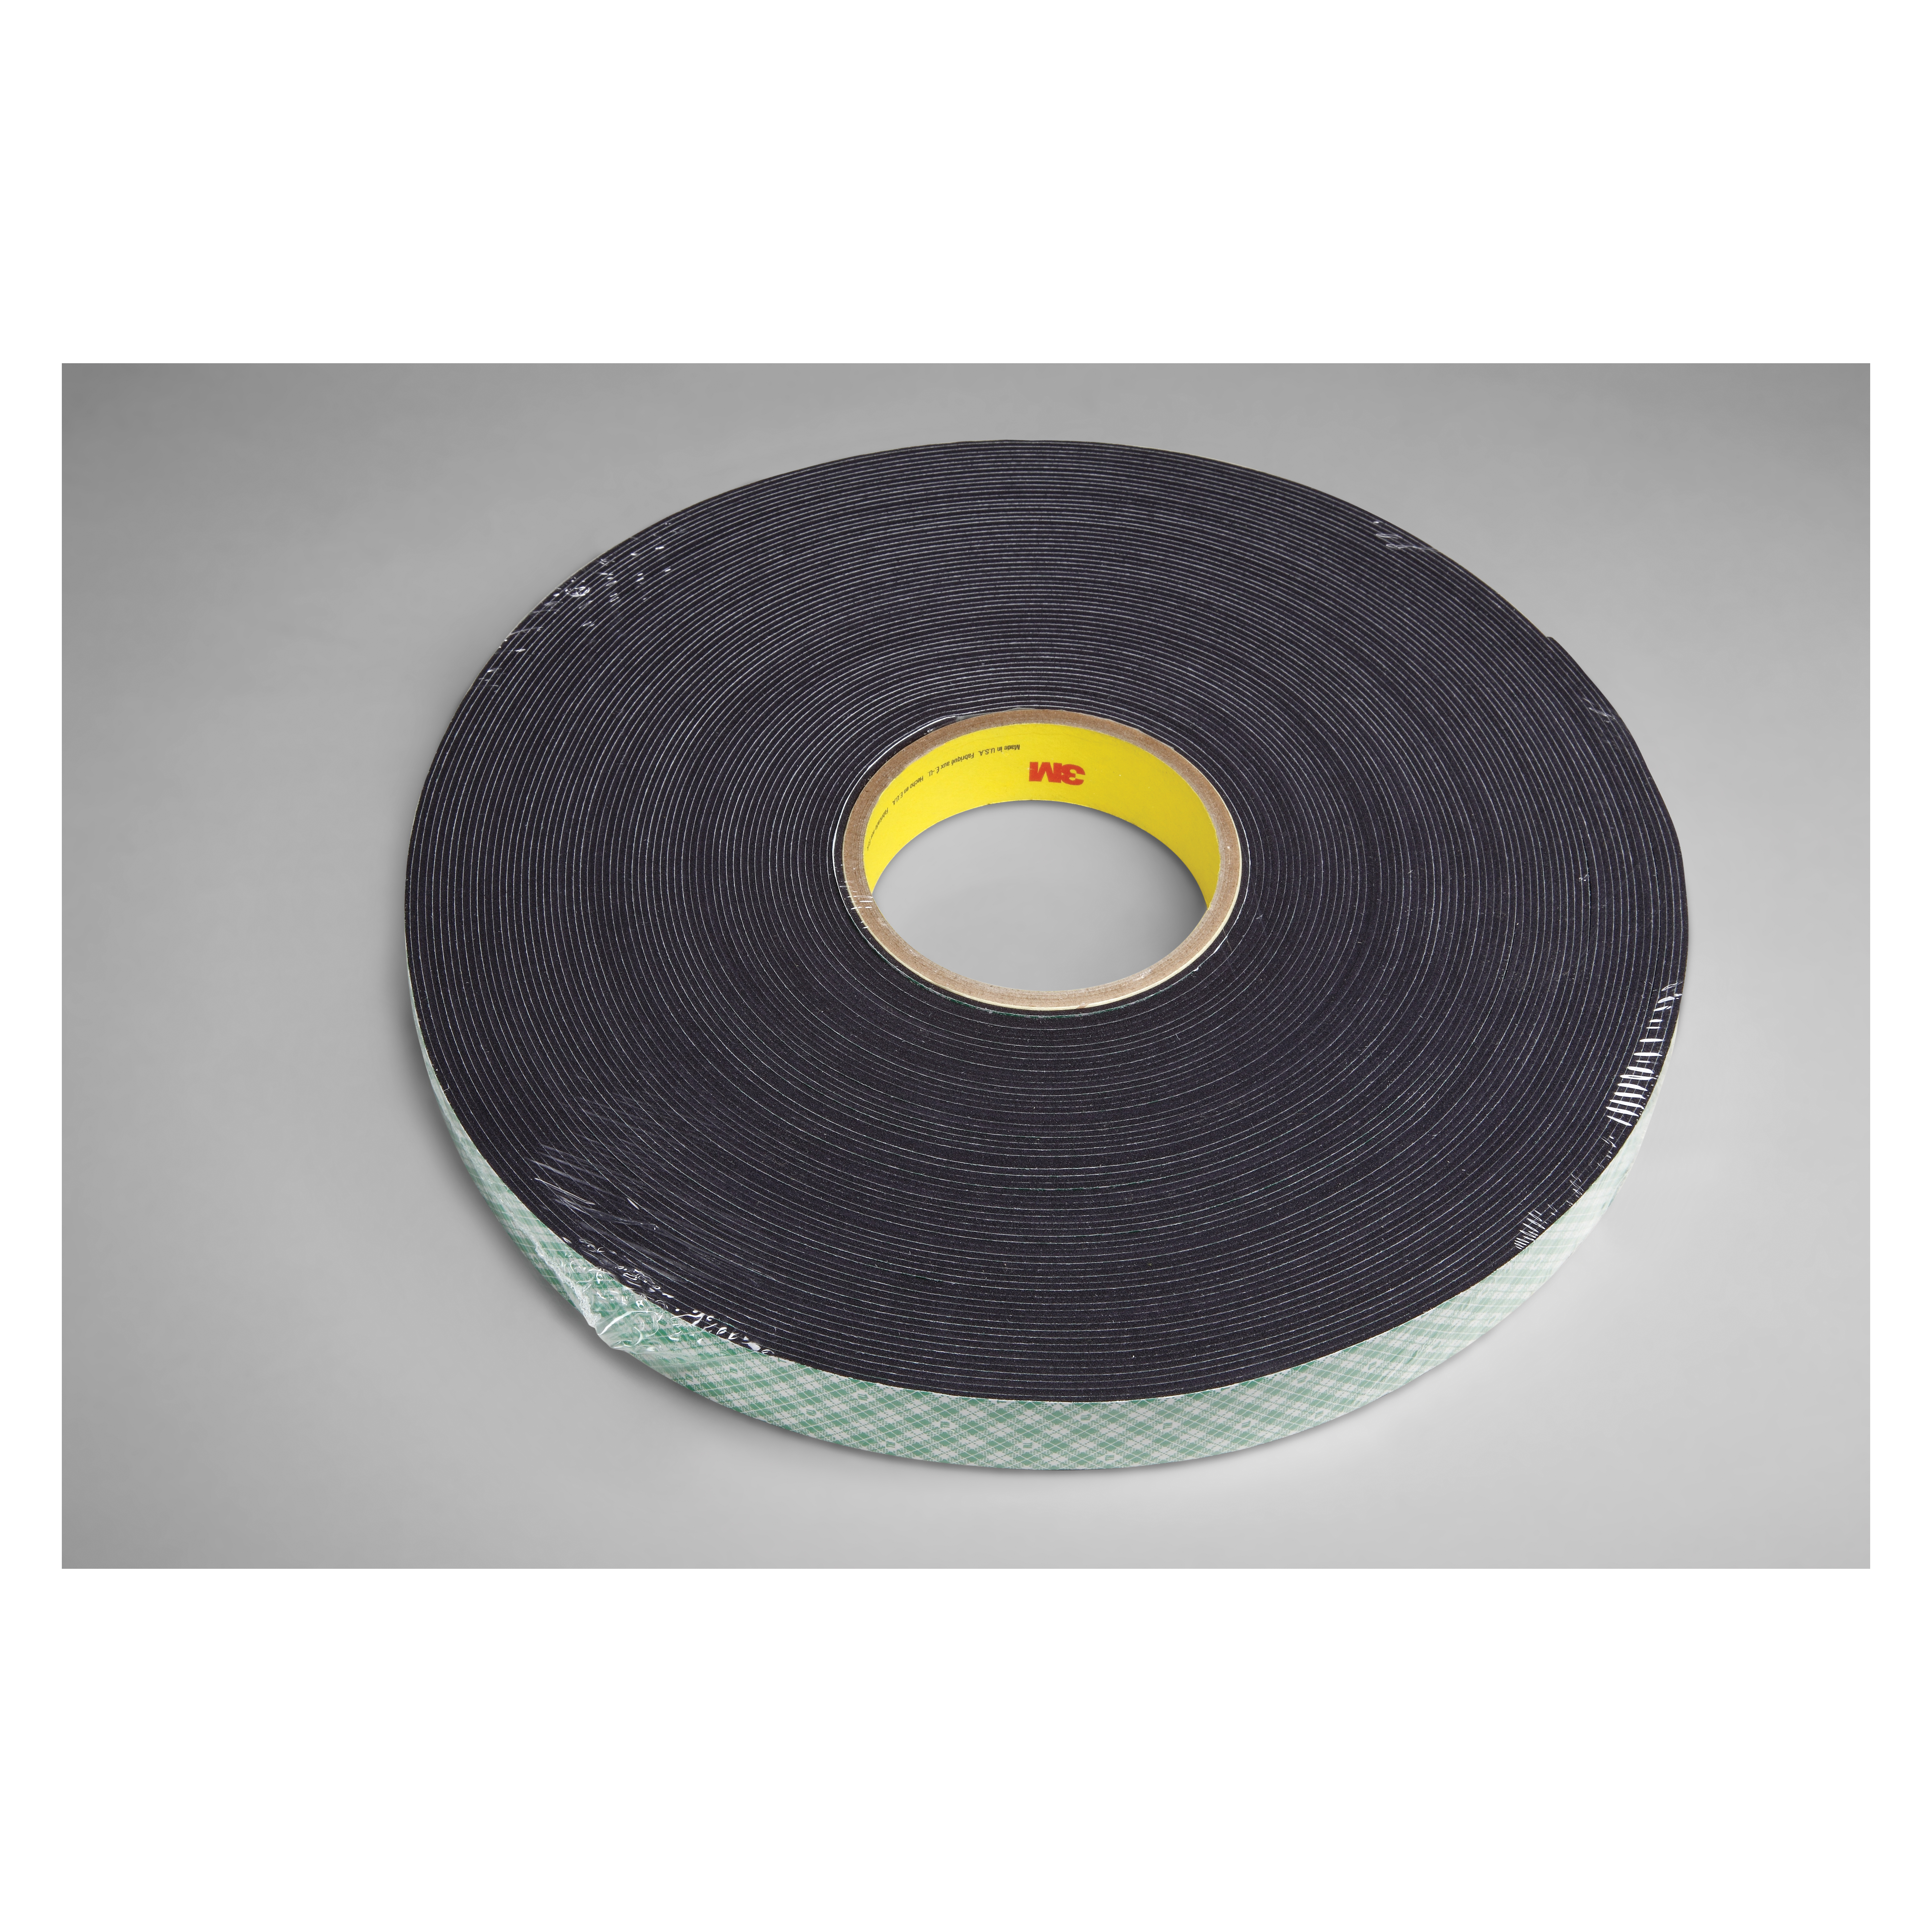 3M™ 021200-14618 Double Coated Tape, 72 yd L x 3/4 in W, 31 mil THK, Acrylic Adhesive, Urethane Foam Backing, Black